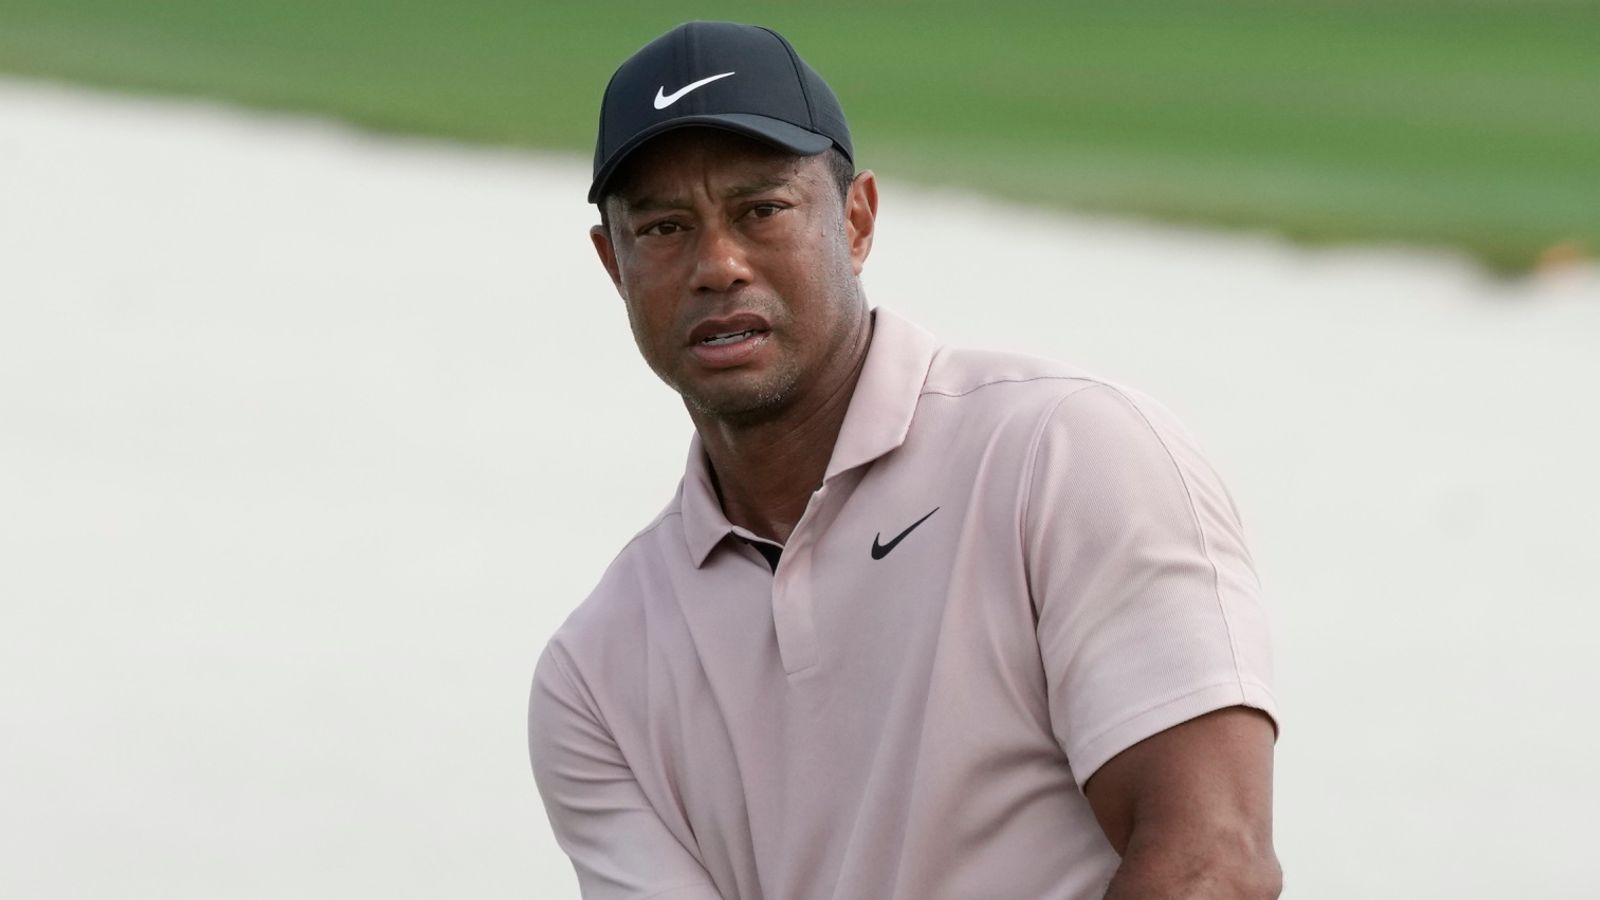 Tiger Woods at the Hero World Challenge LIVE! Updates from latest